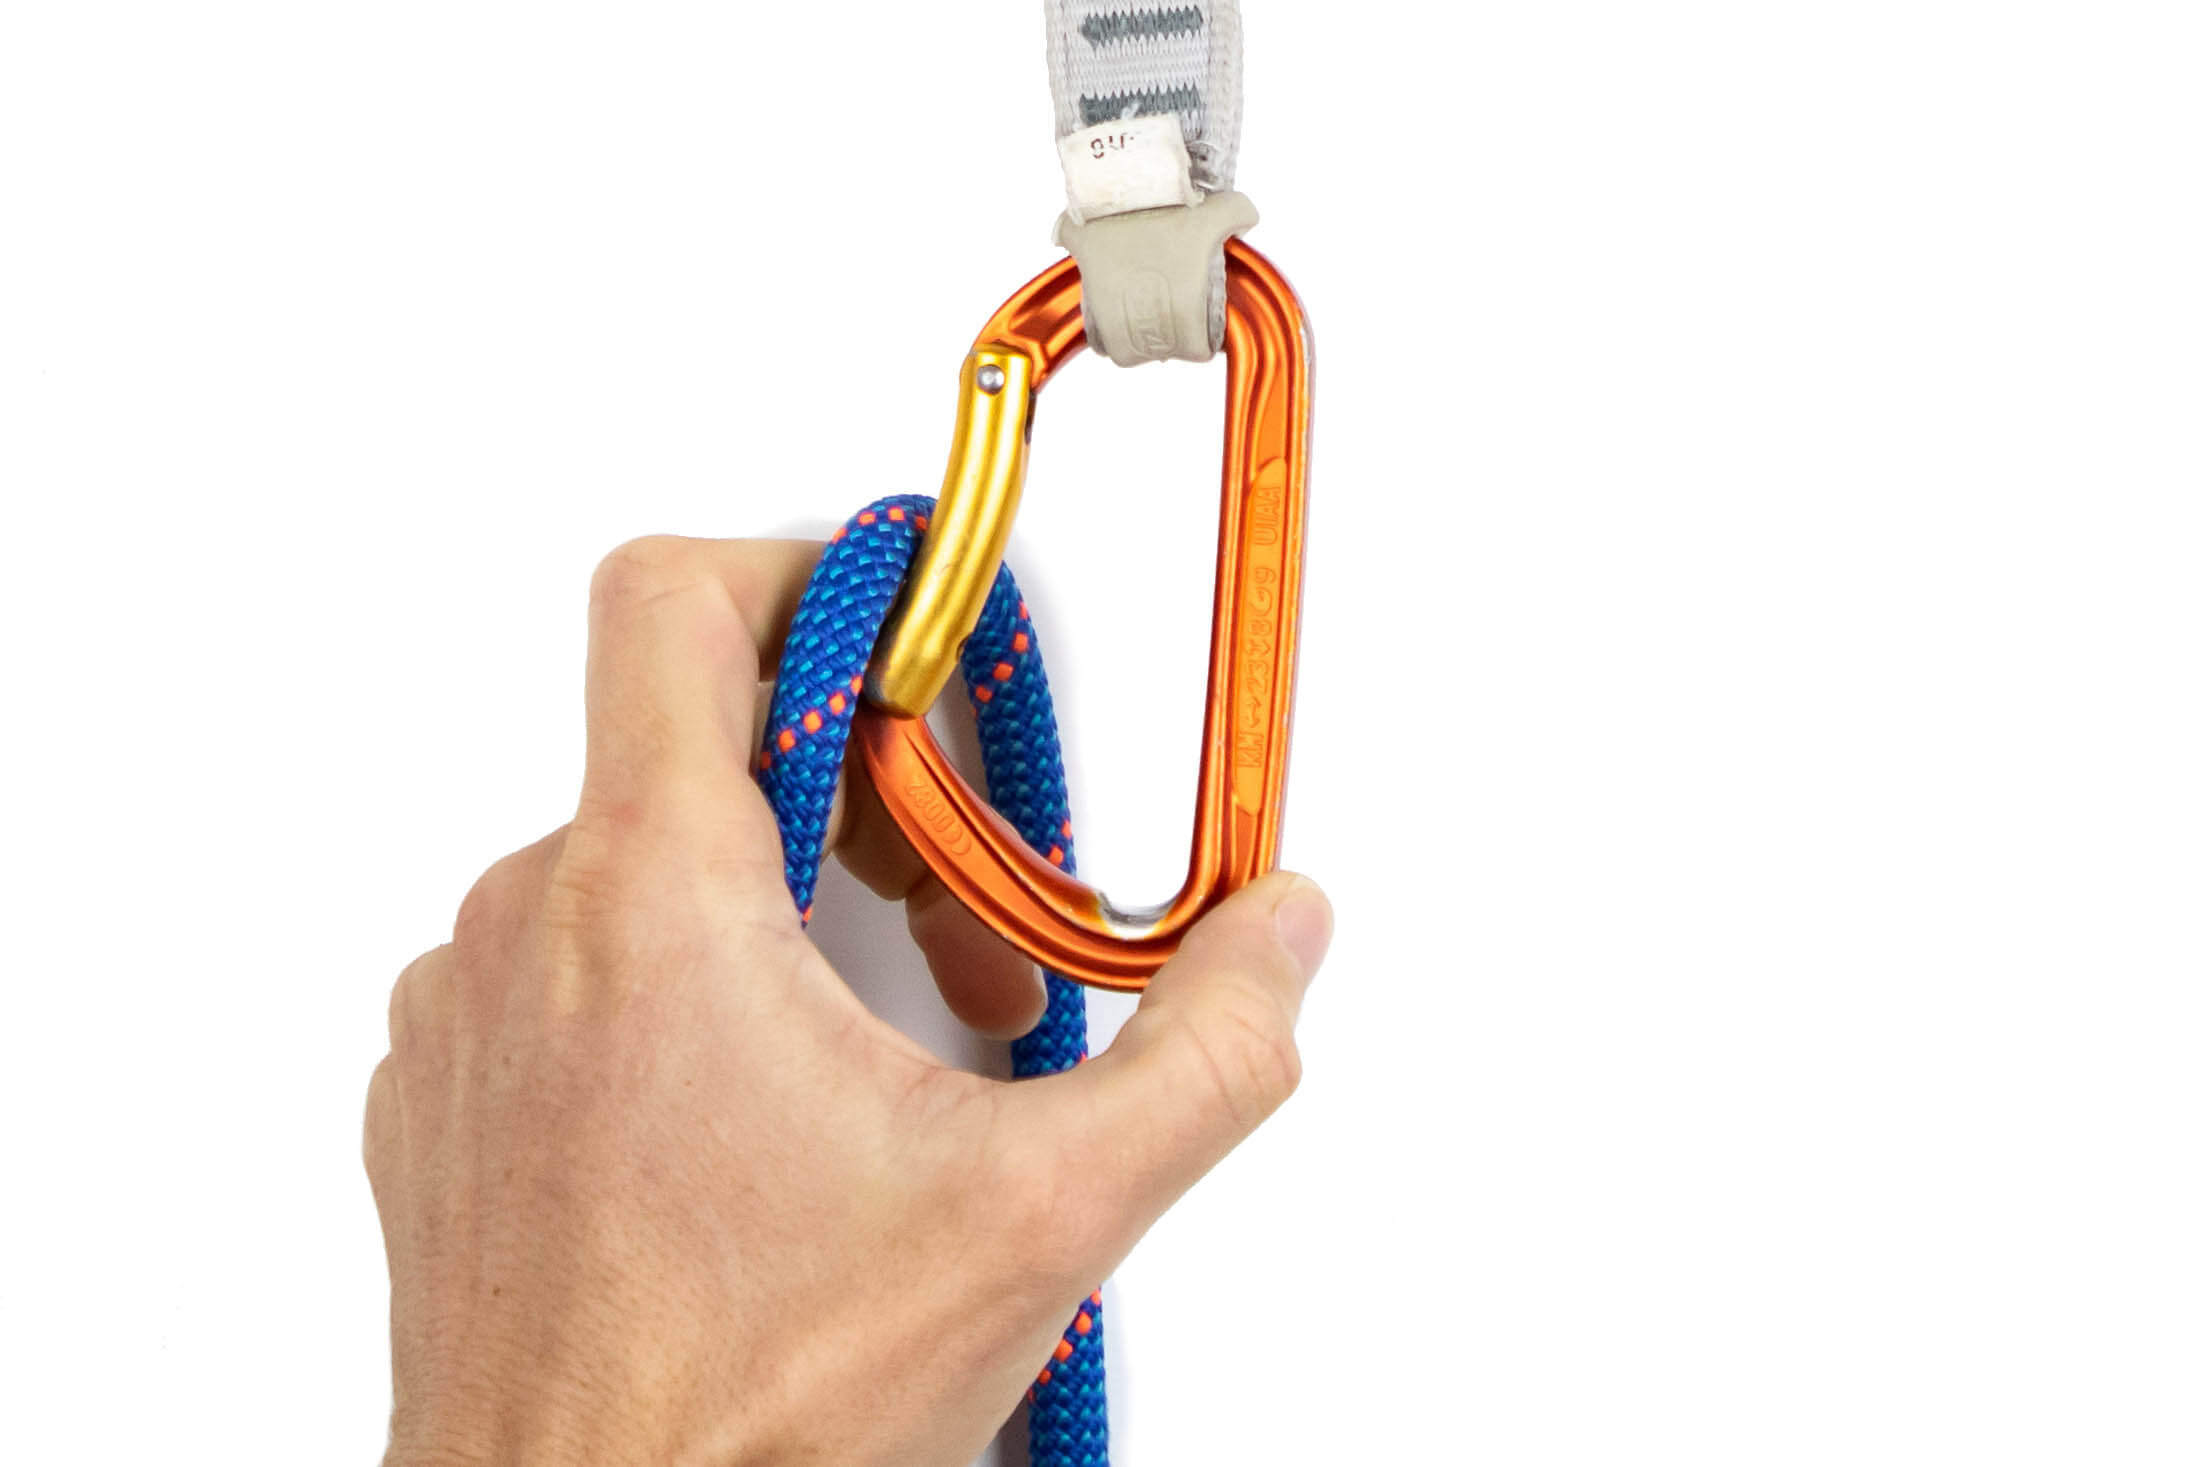 clipping rope-side carabiner